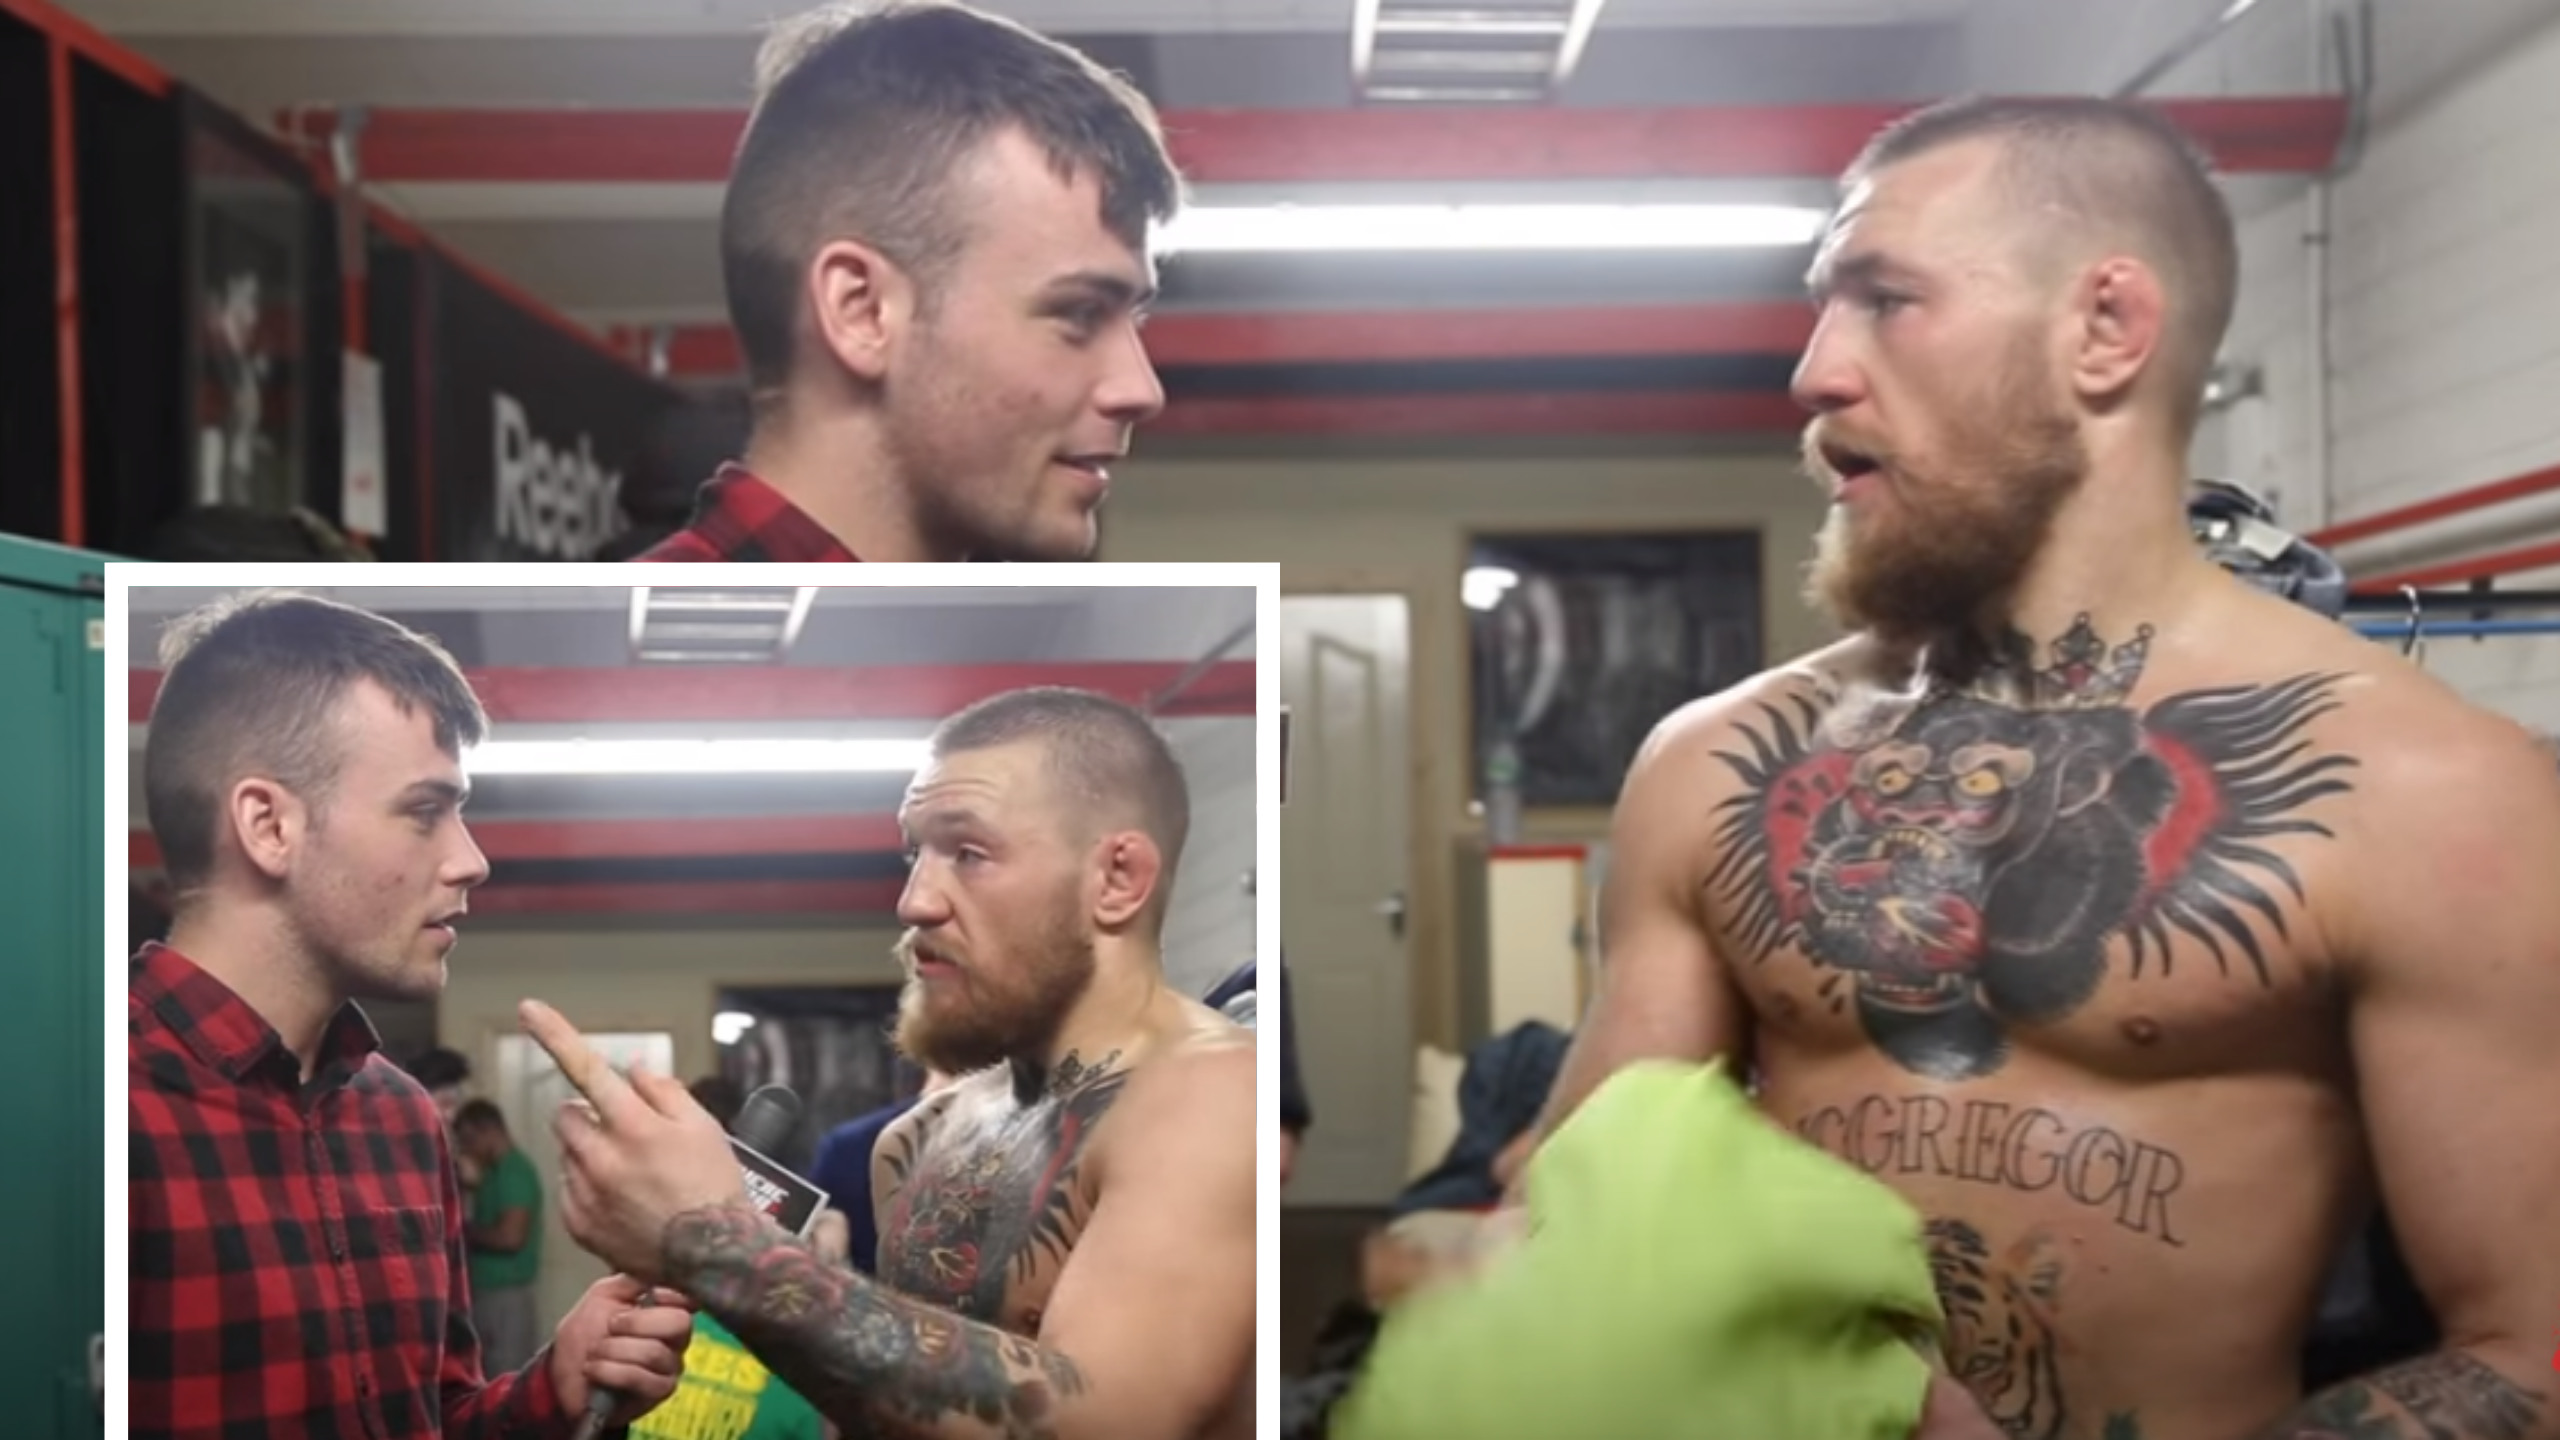 Conor McGregor Retweets Footage Of Himself Discussing Fighting At Welterweight